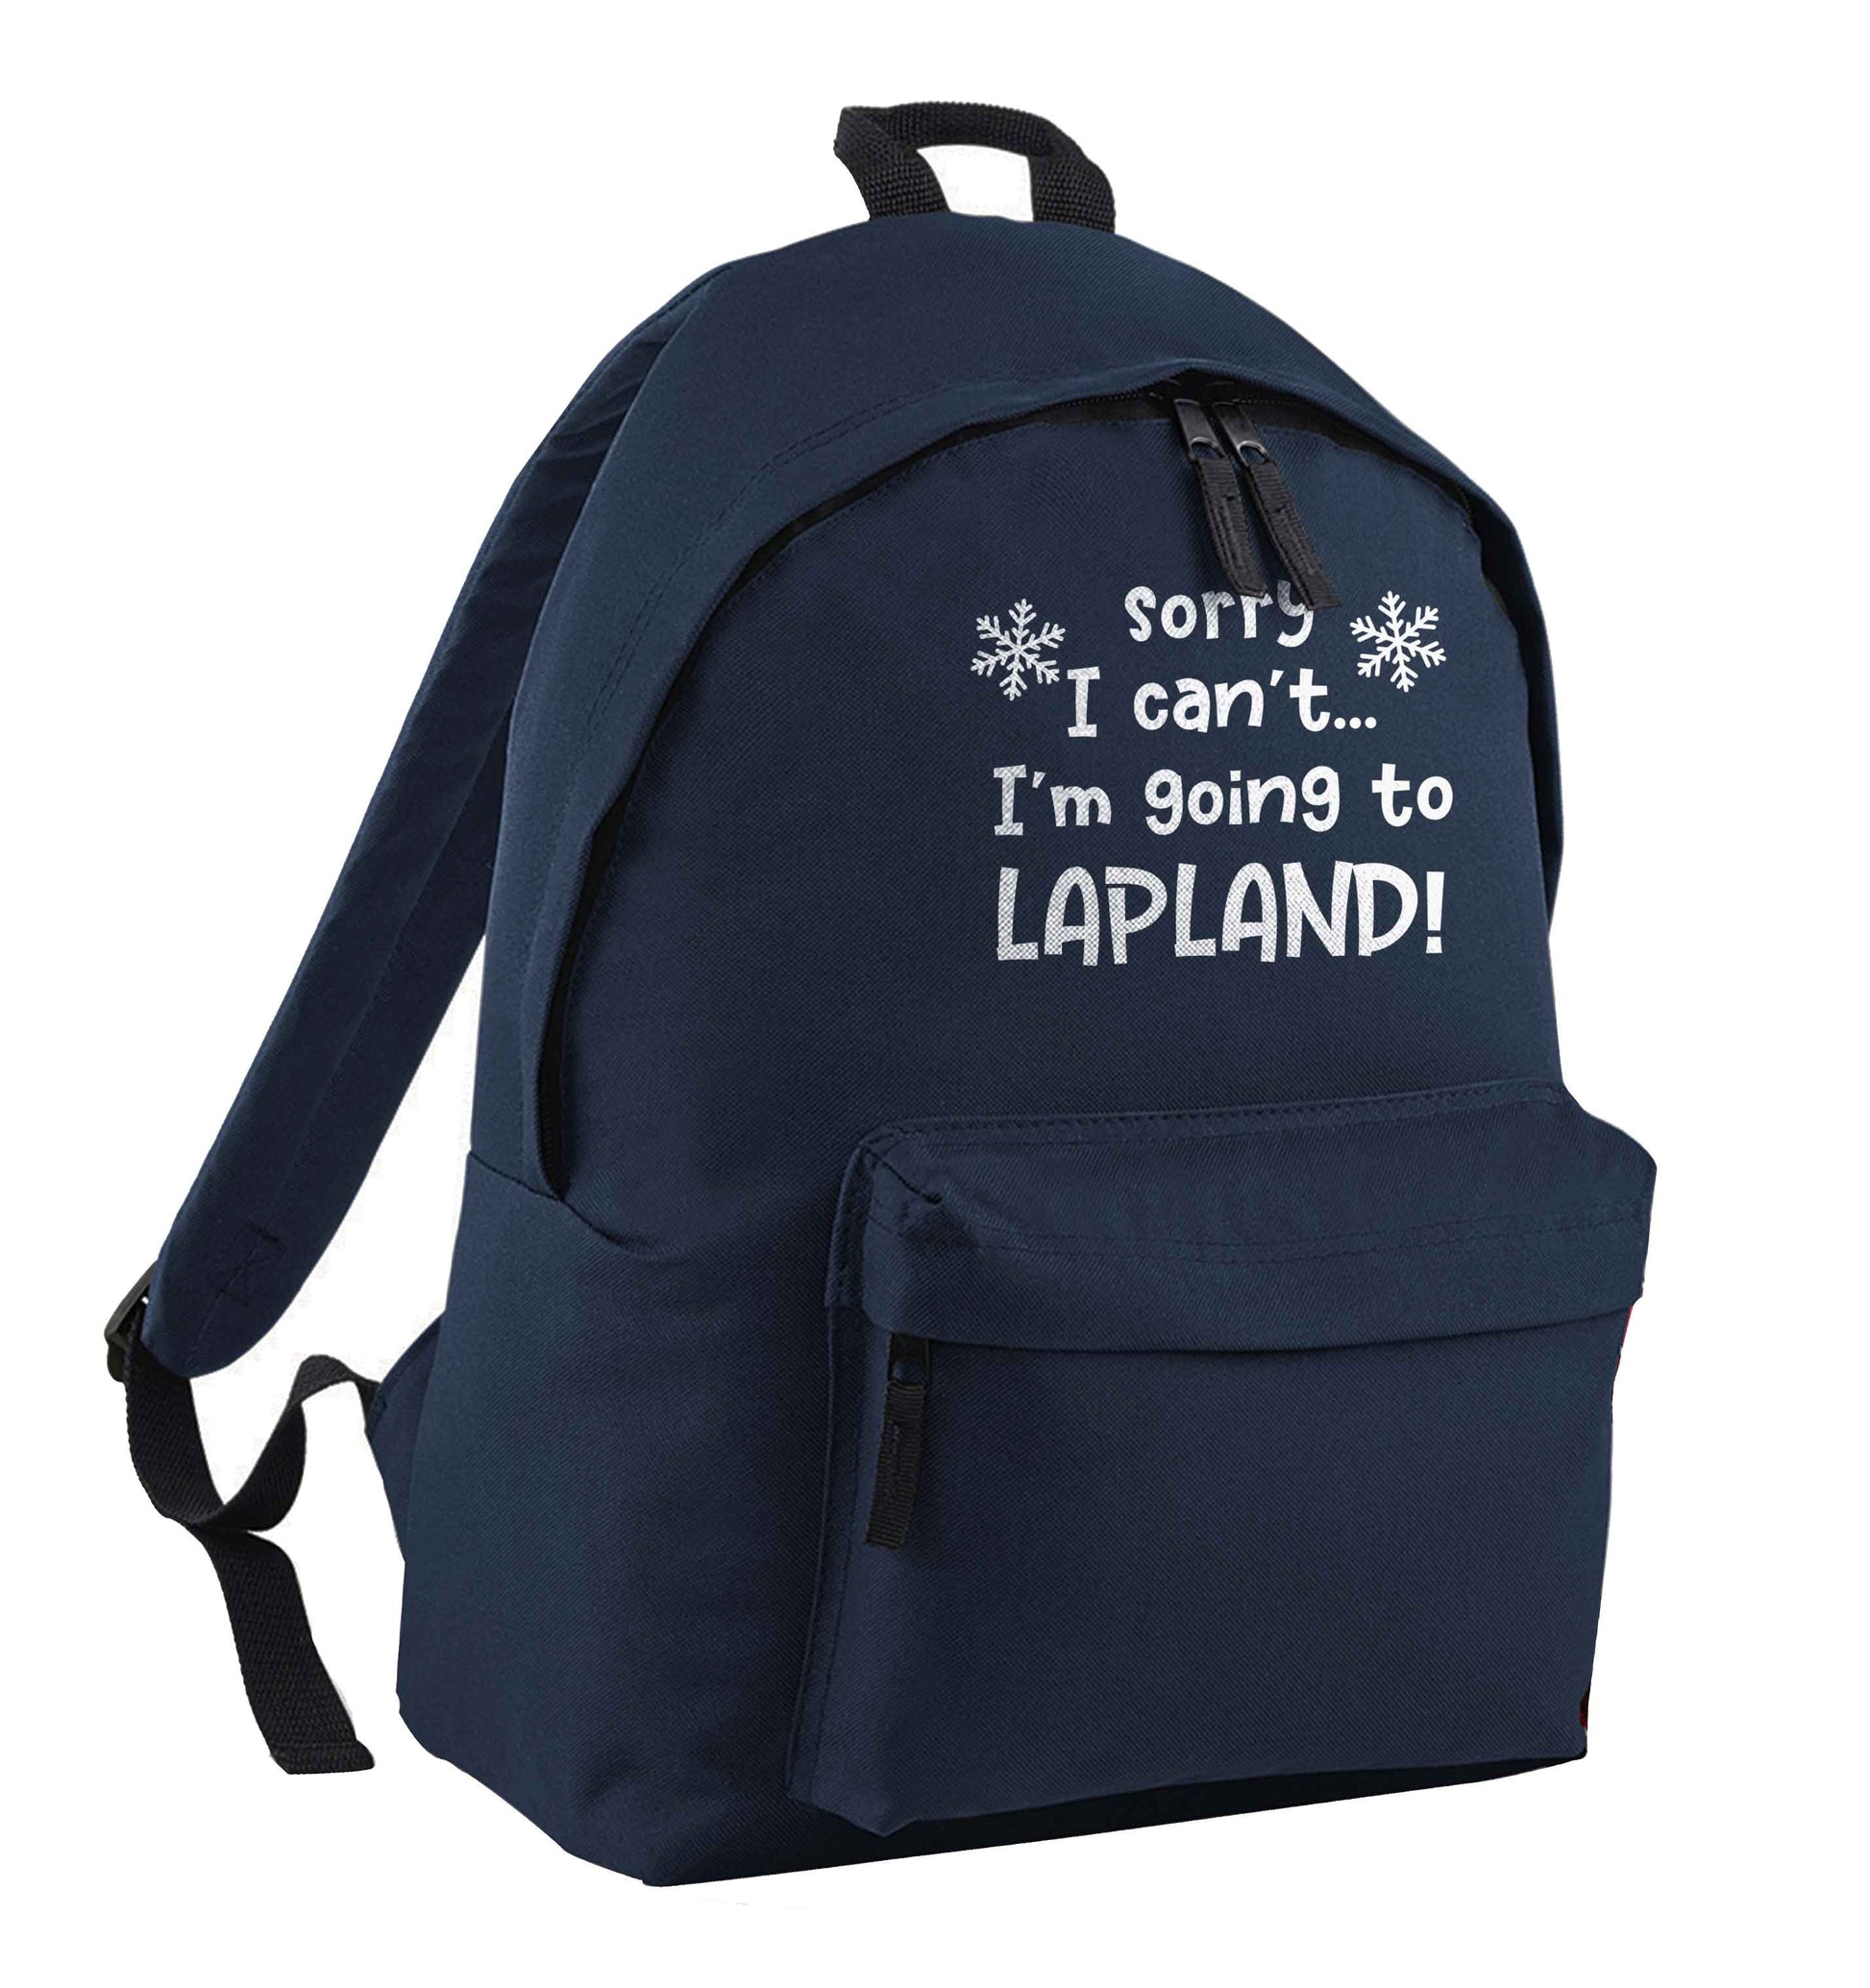 Sorry I can't I'm going to Lapland navy children's backpack